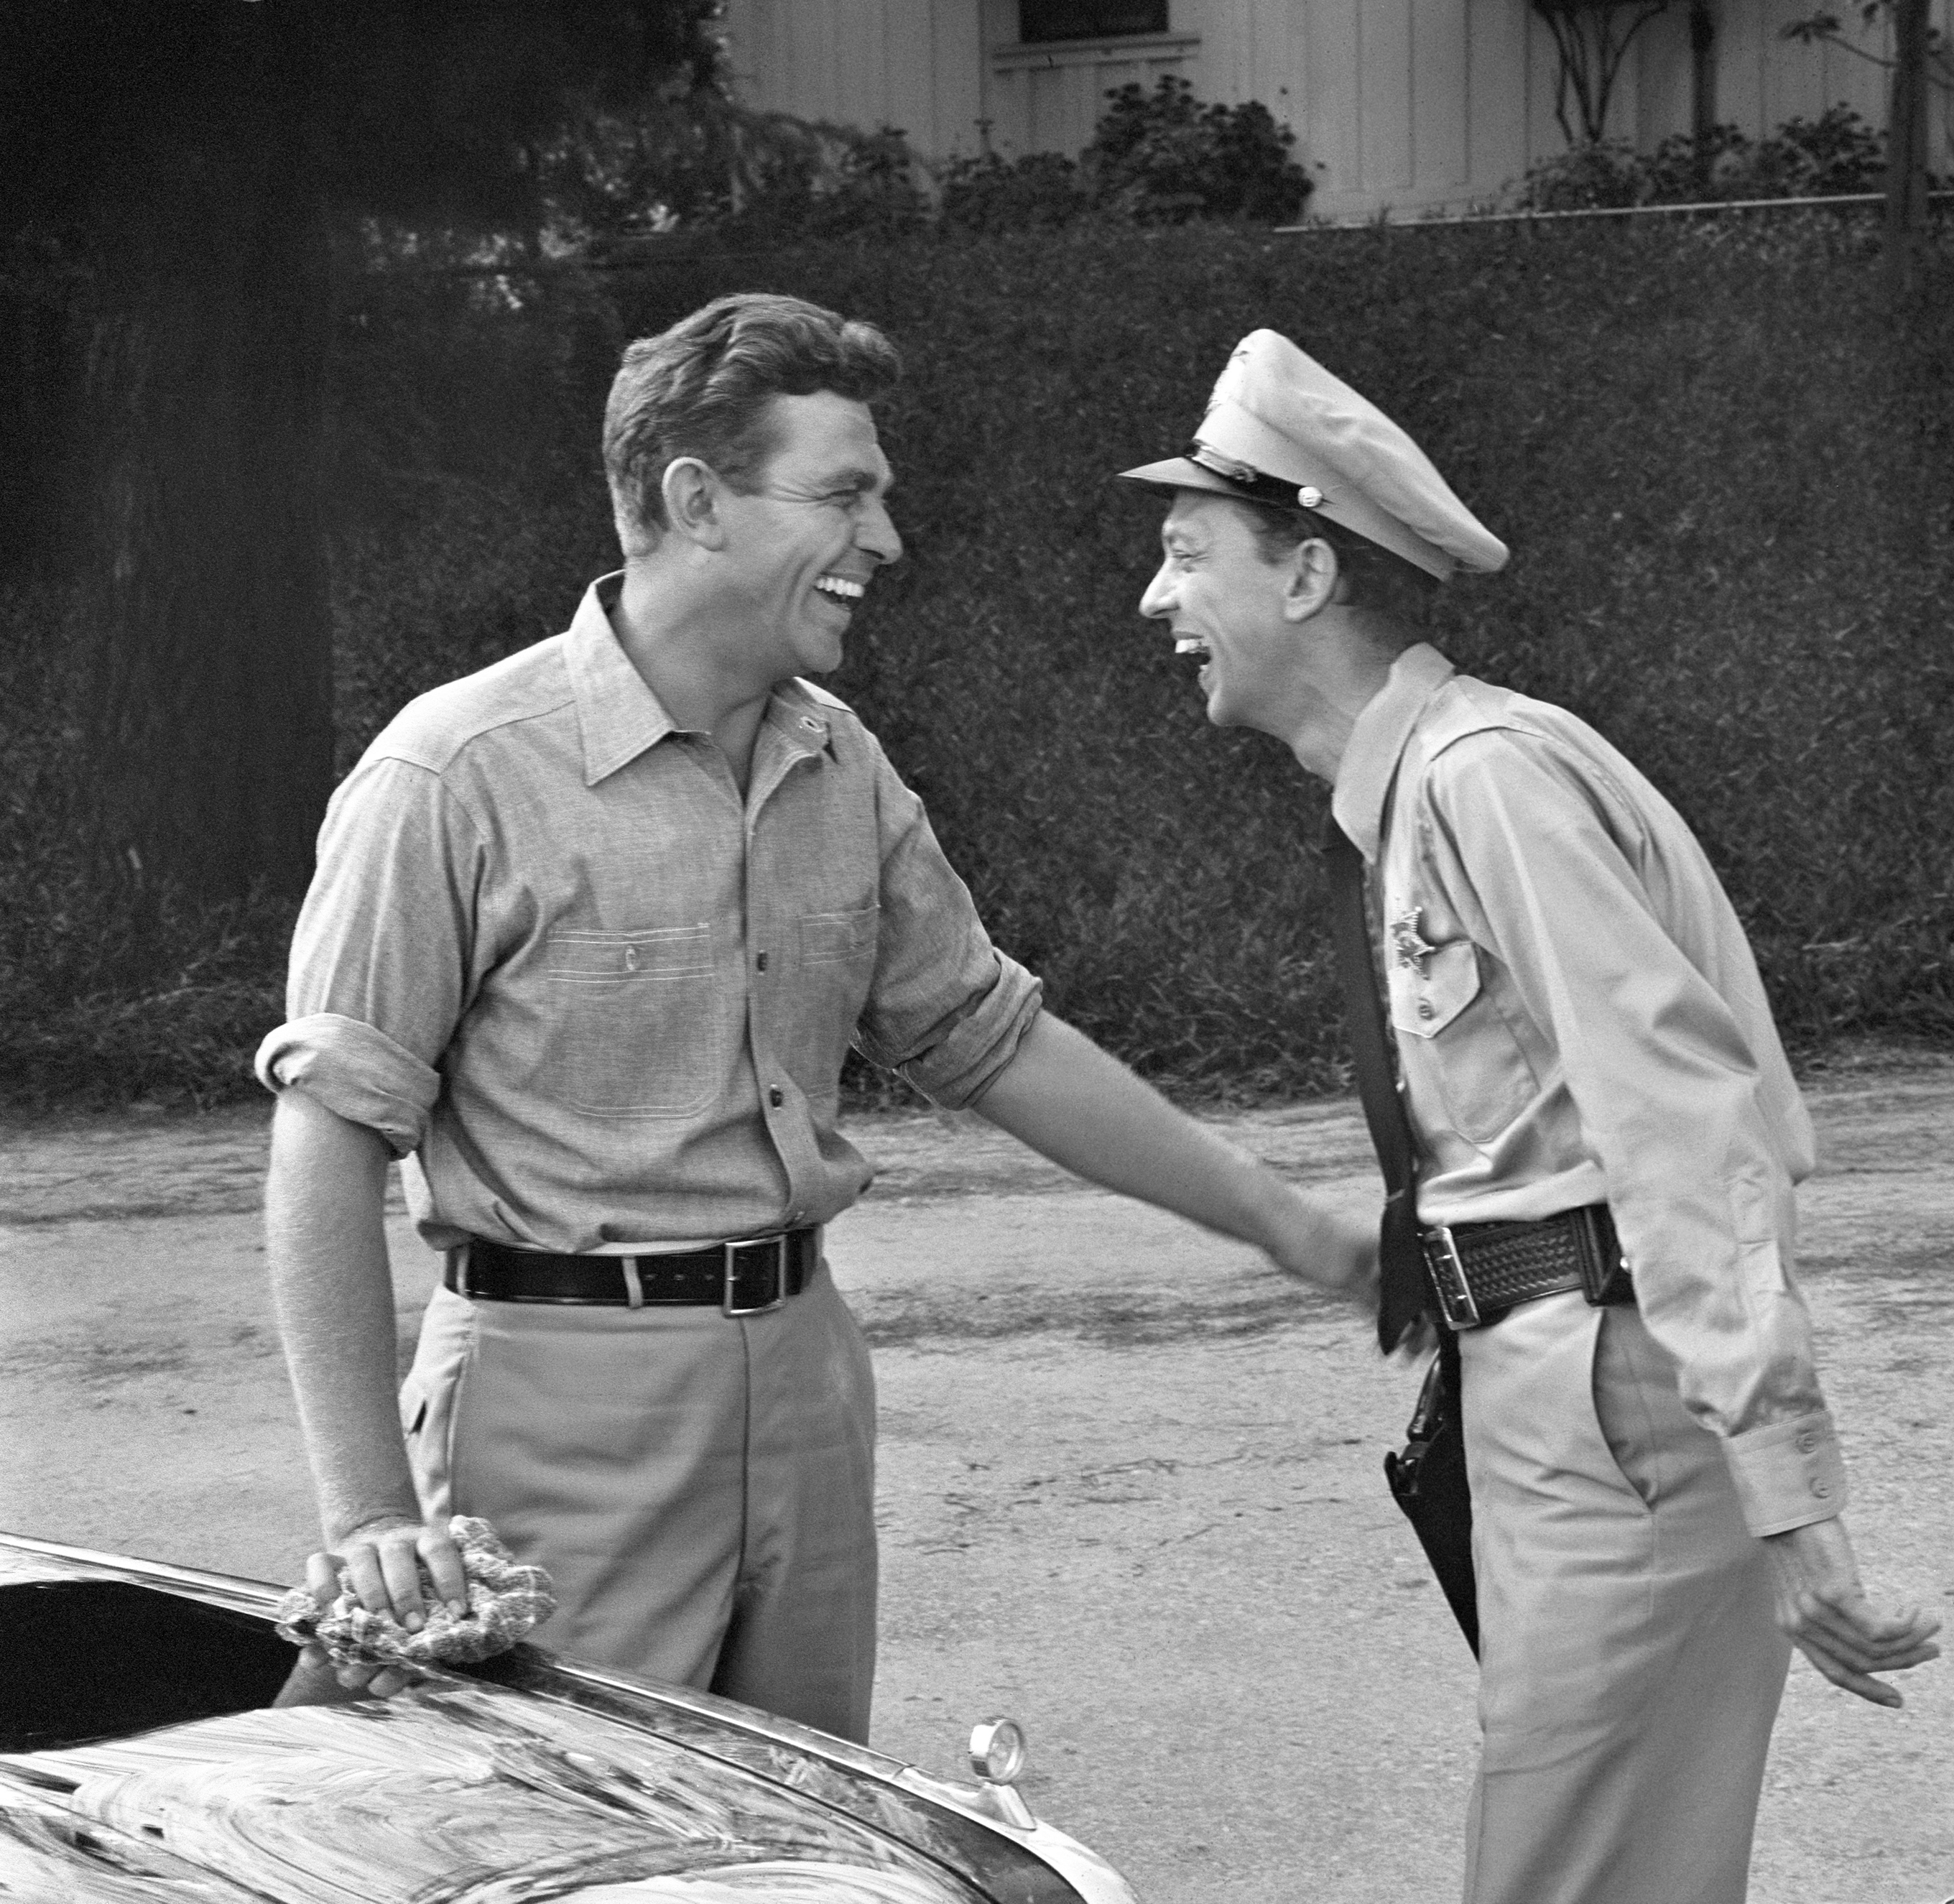 Actor Don Knotts, right, and Andy Griffith share a laugh in a scene from 'The Andy Griffith Show'